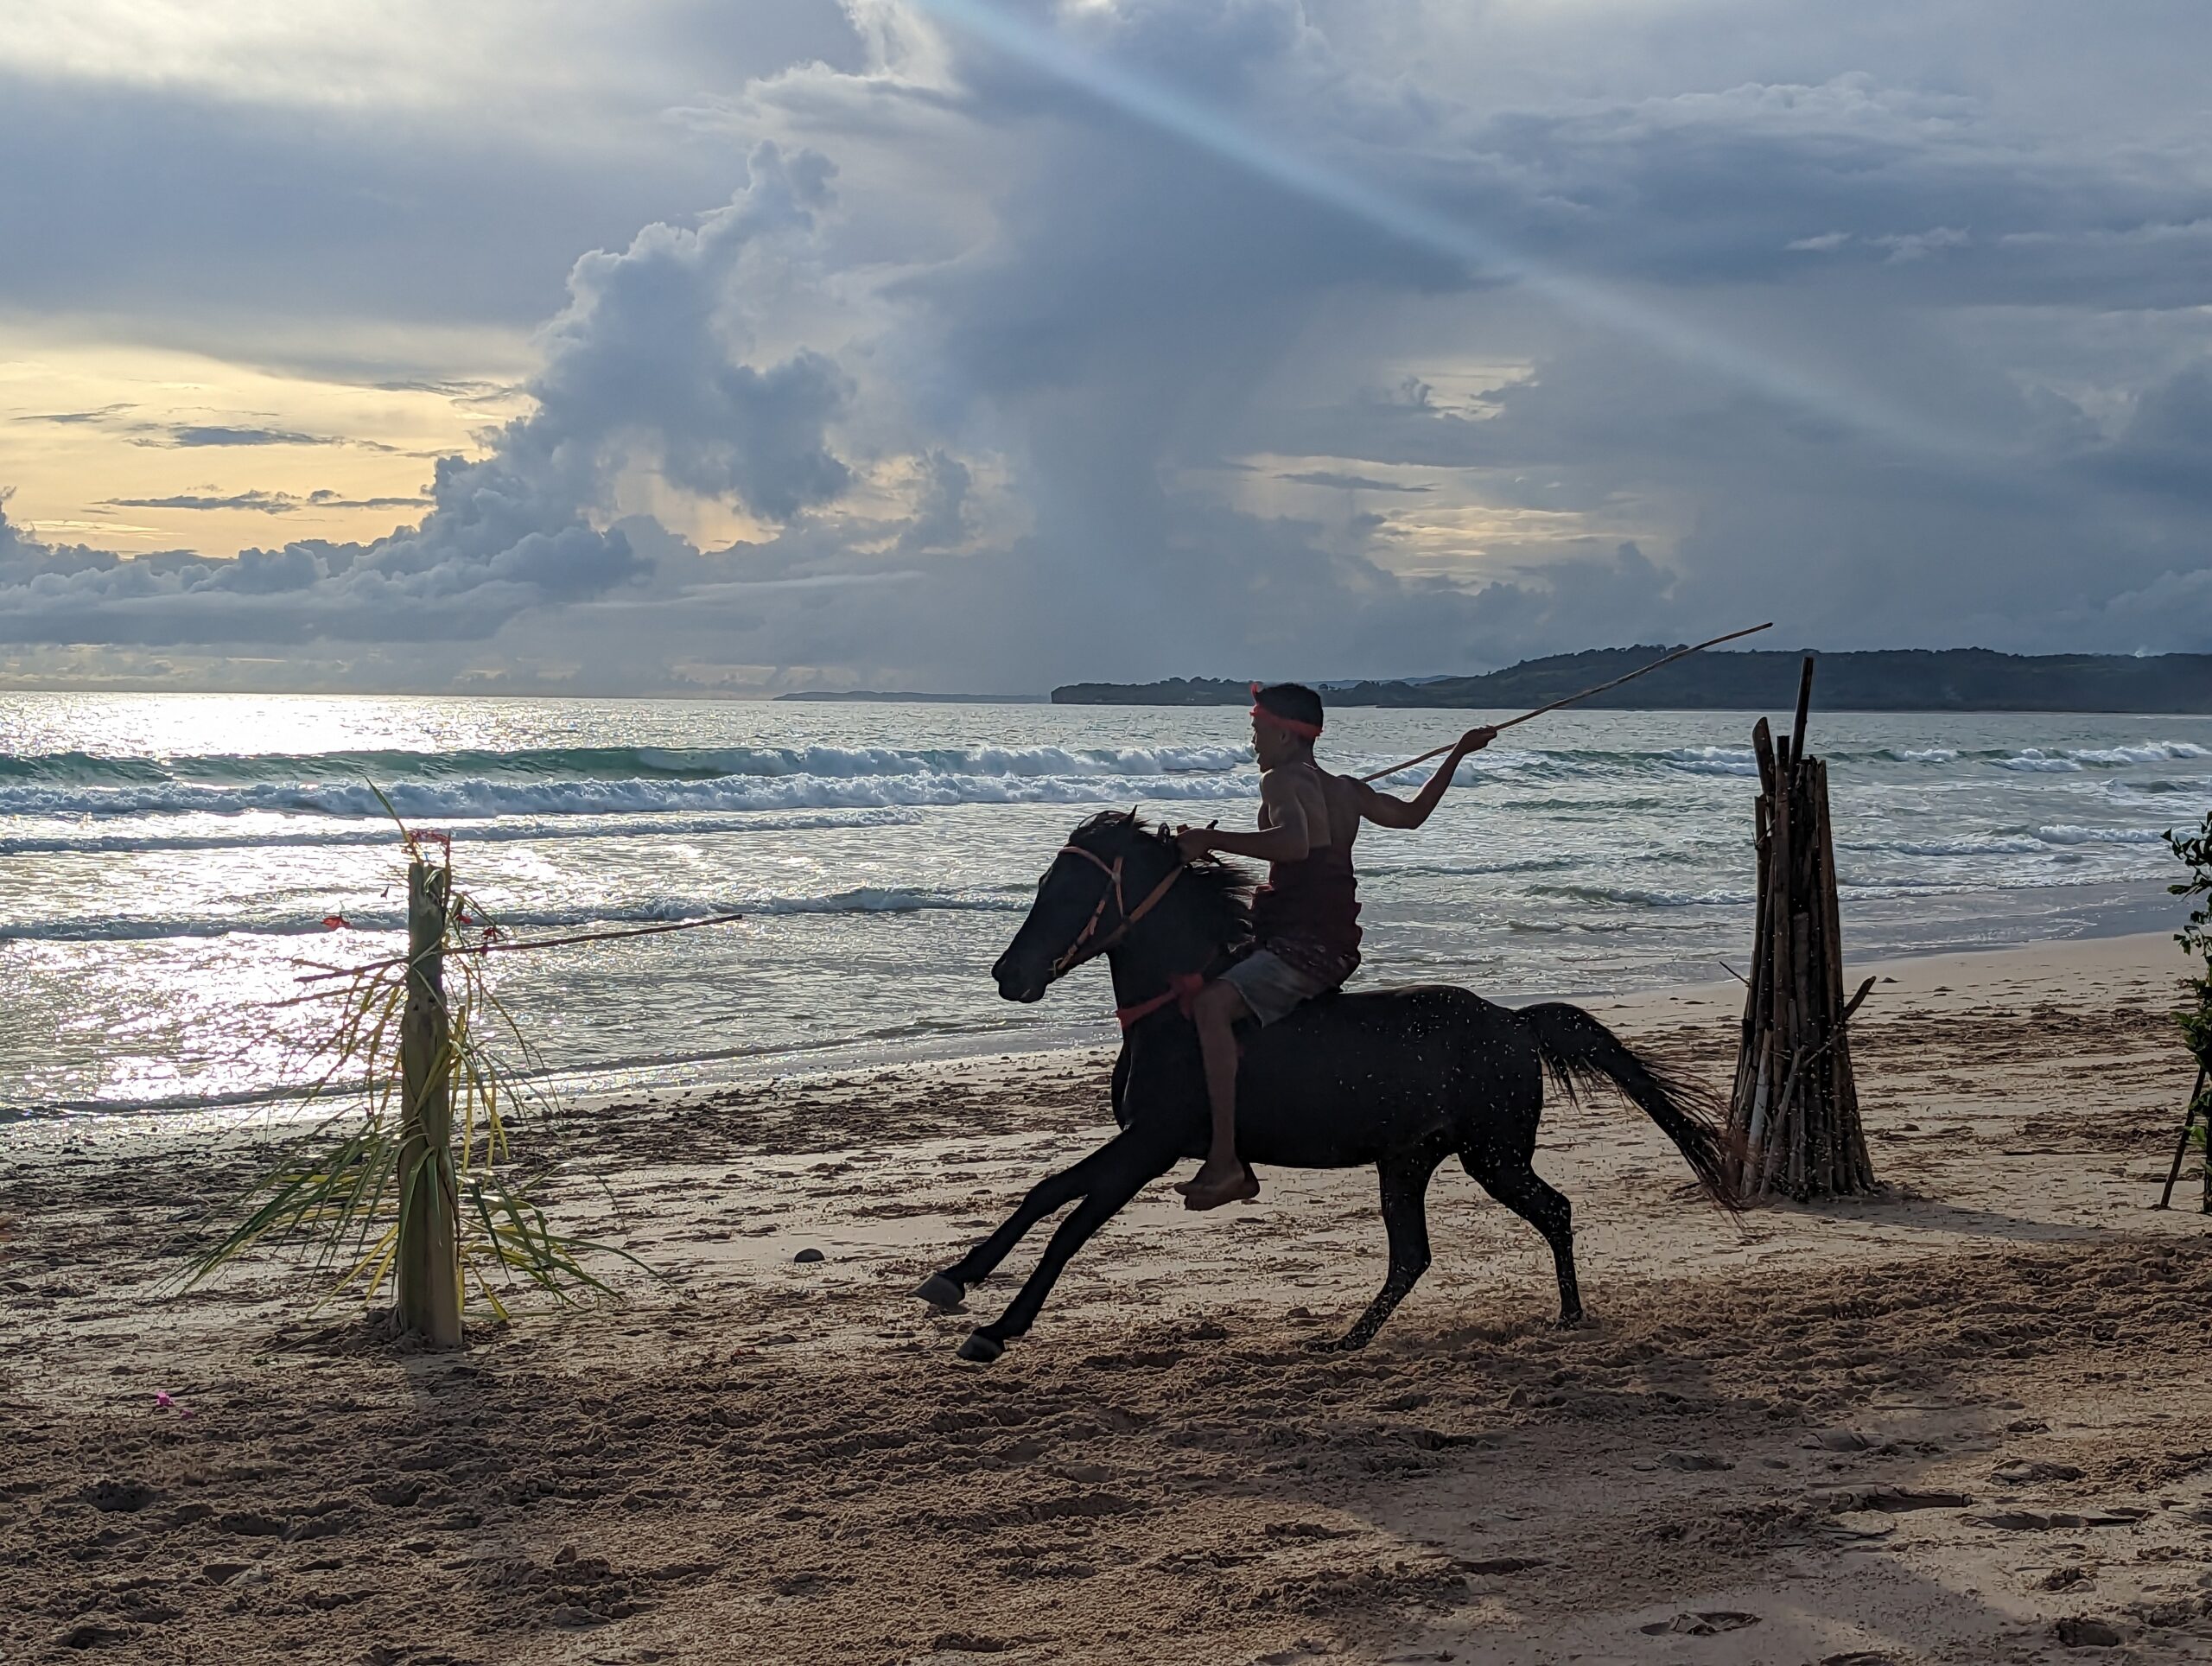 Horse back rider with hunting staff on beach